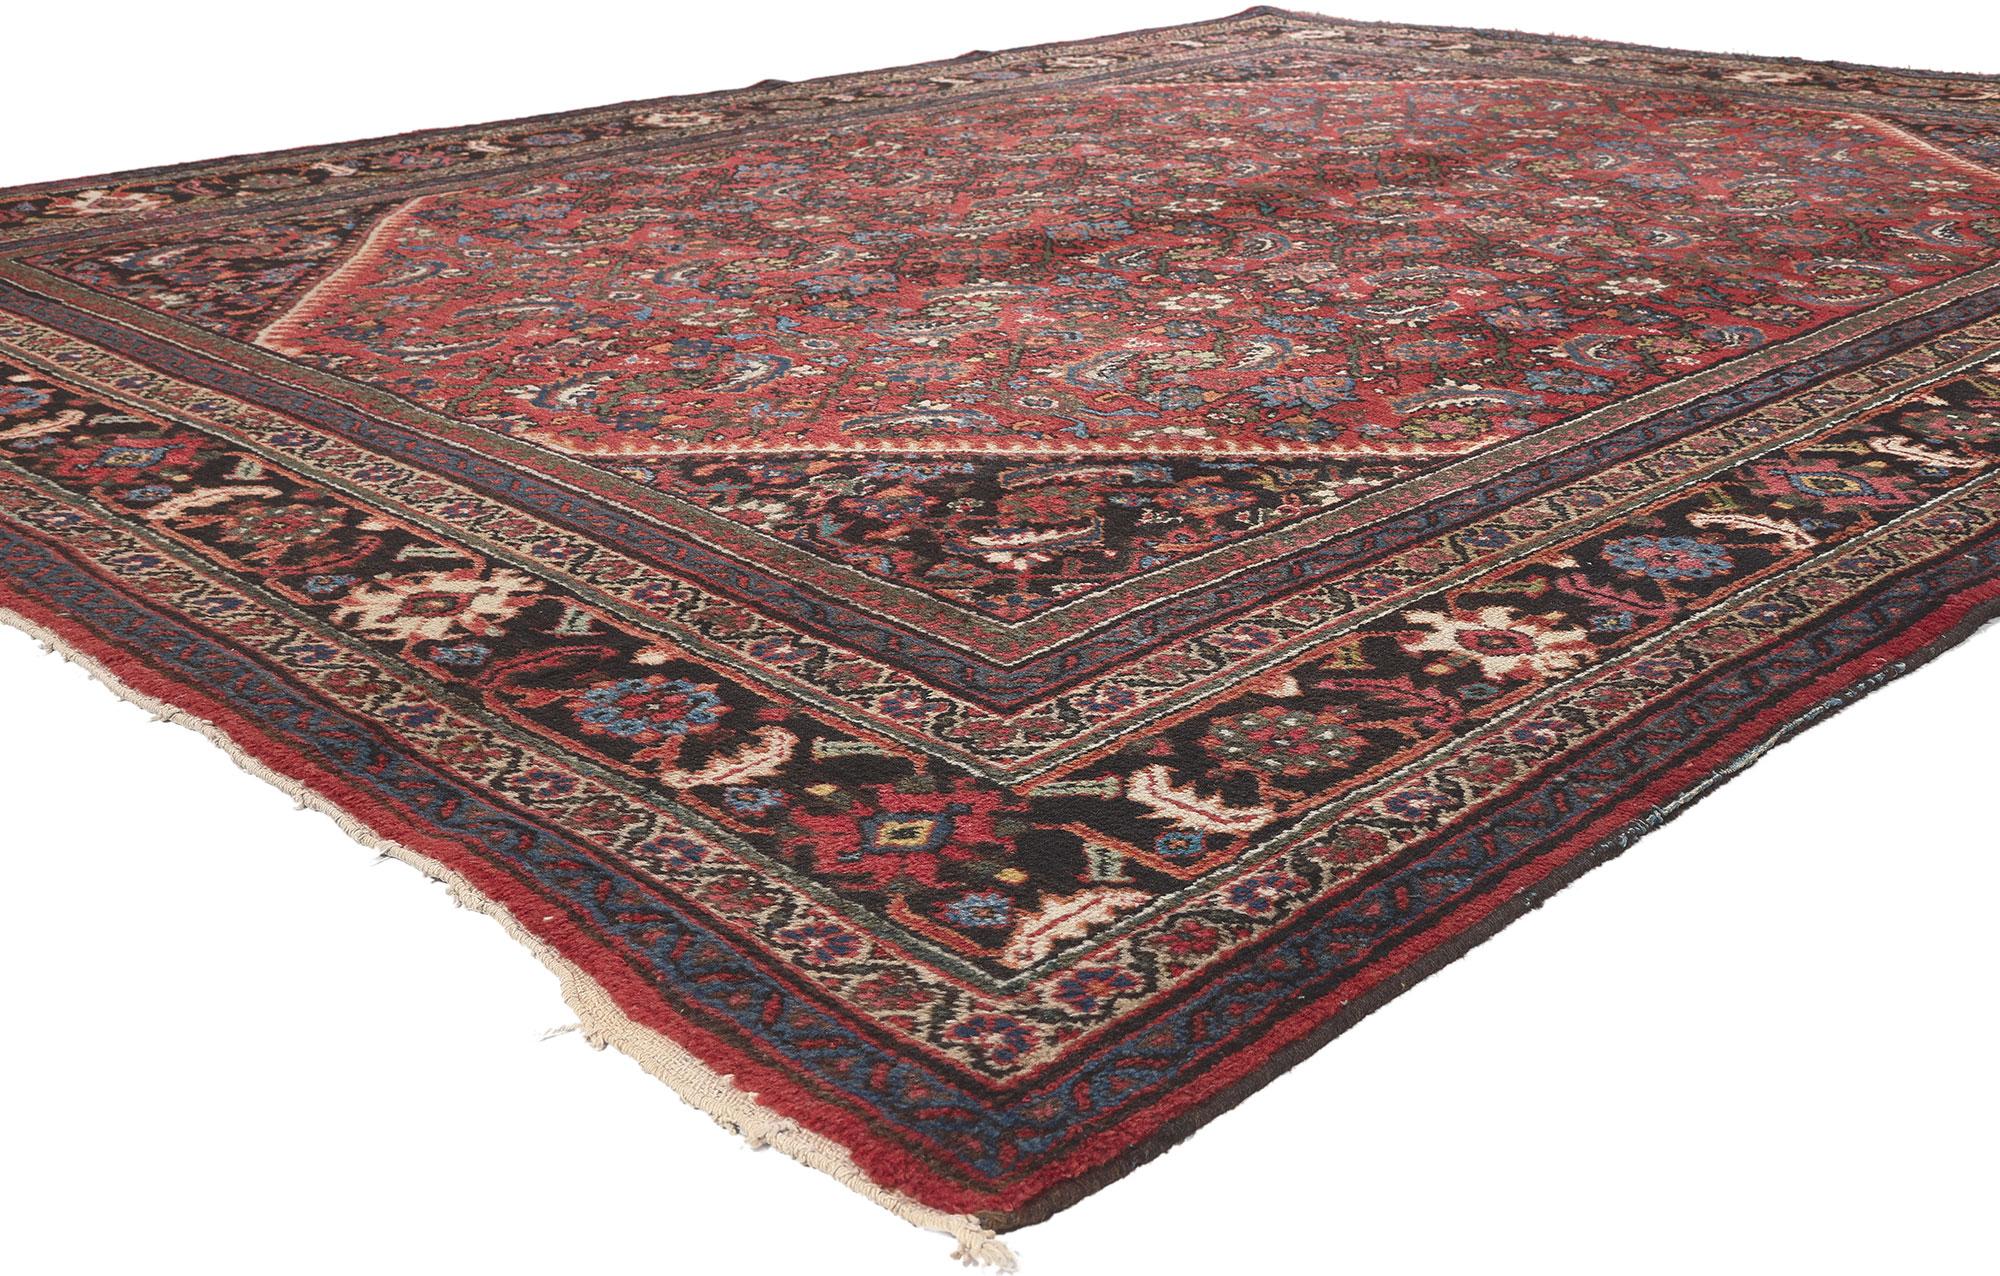 76926 Antique Persian Mahal Rug, 08'10 x 11'10. Perpetually posh meets Ivy League style in this hand knotted wool antique Persian Mahal rug. The naturalistic details and sophisticated color palette woven into this piece work together creating a look